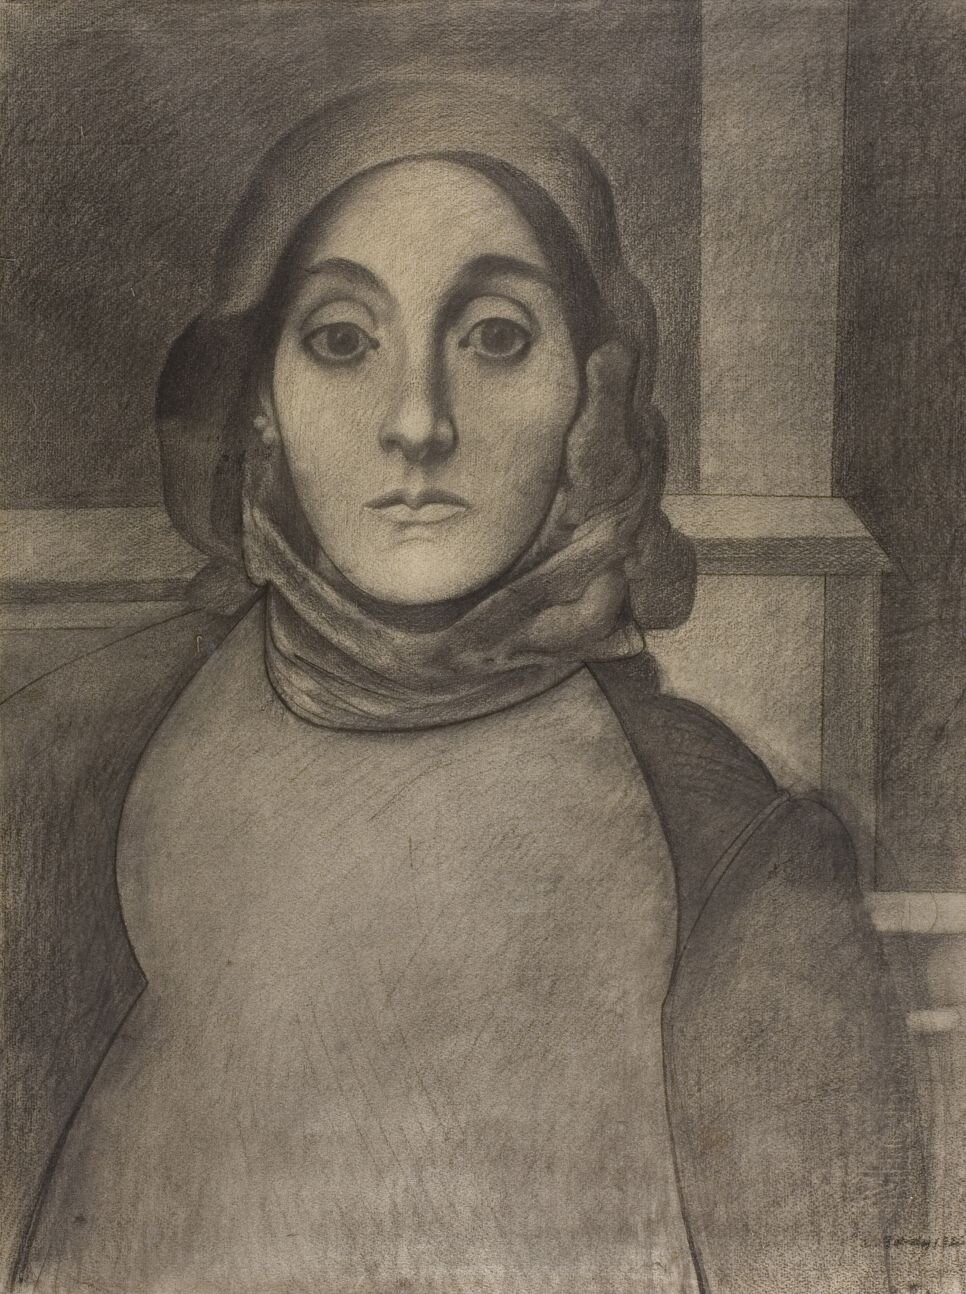 The Artist’s Mother, 1926 or 1936, charcoal on laid paper, 24 13/16 x 19 1/8 in. (63 x 48.6 cm). Art Institute of Chicago. Worcester Sketch Fund, 1965.510. Photo    © The Art Institute of Chicago